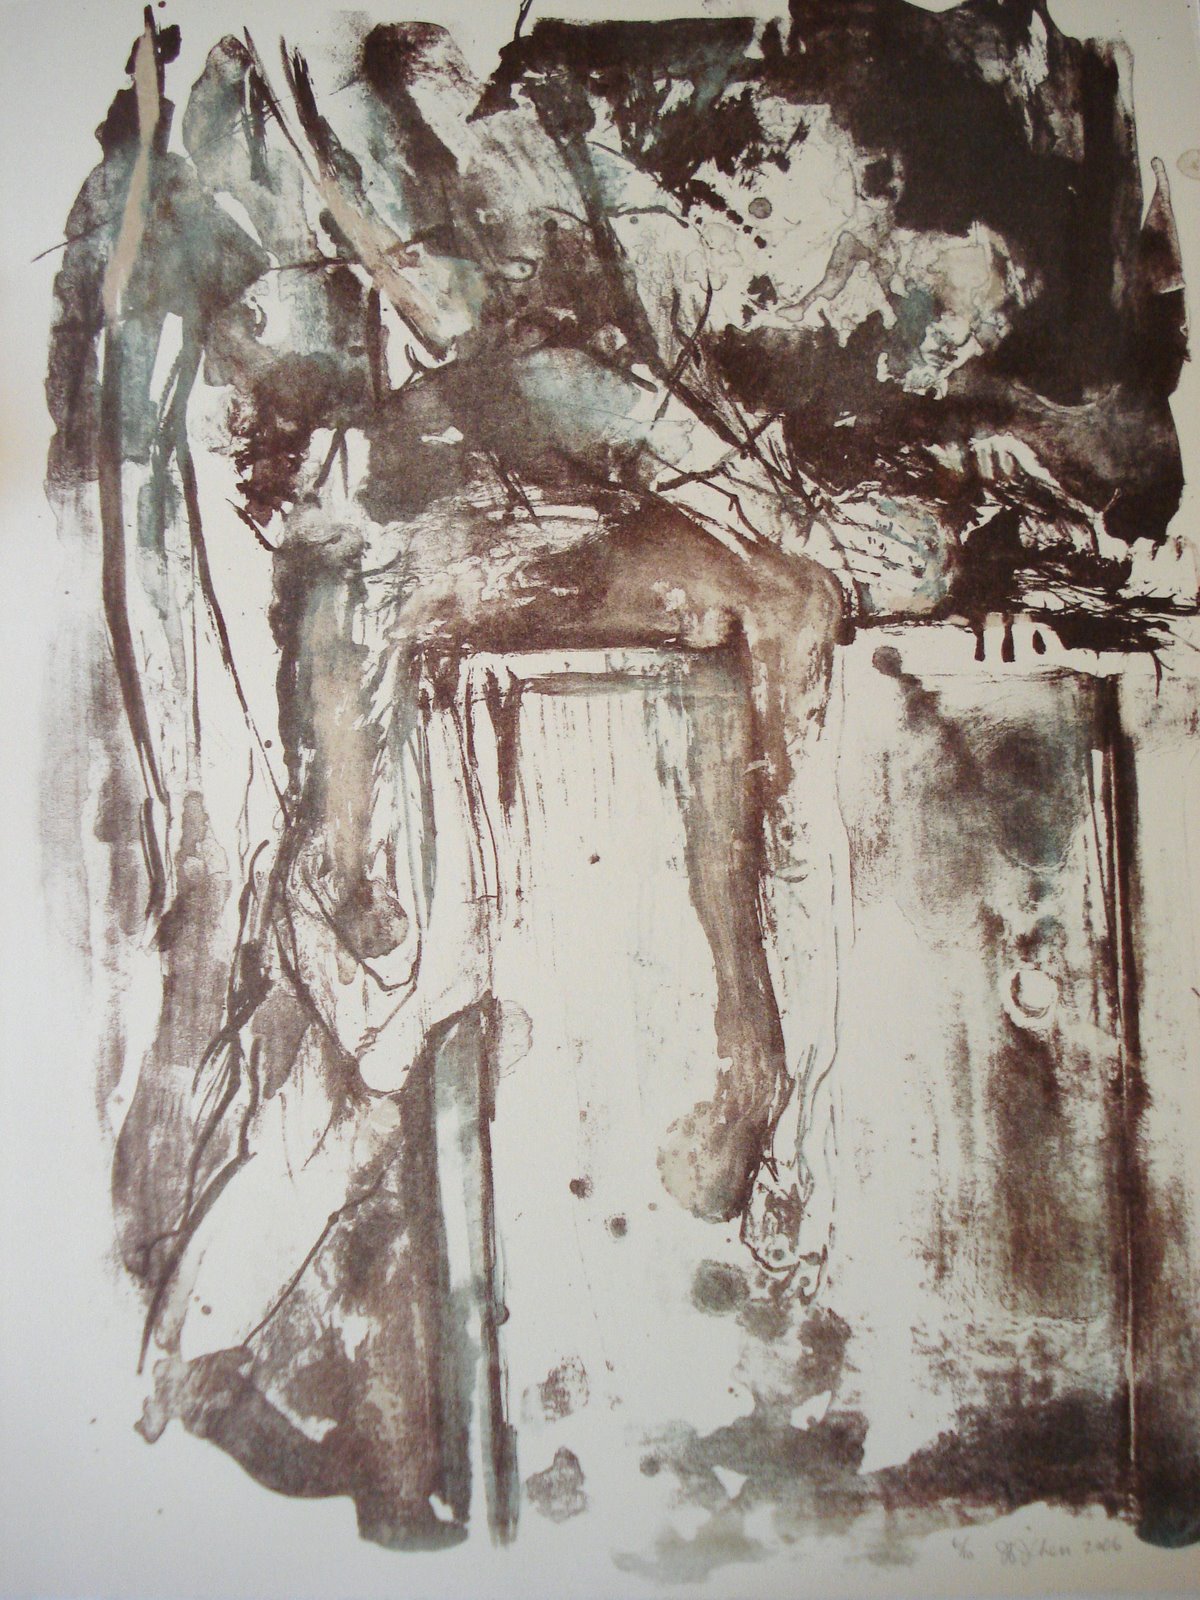 [3Chen,+Jennifer-+Lithography-Untitled+2006,+18x15in.jpg]